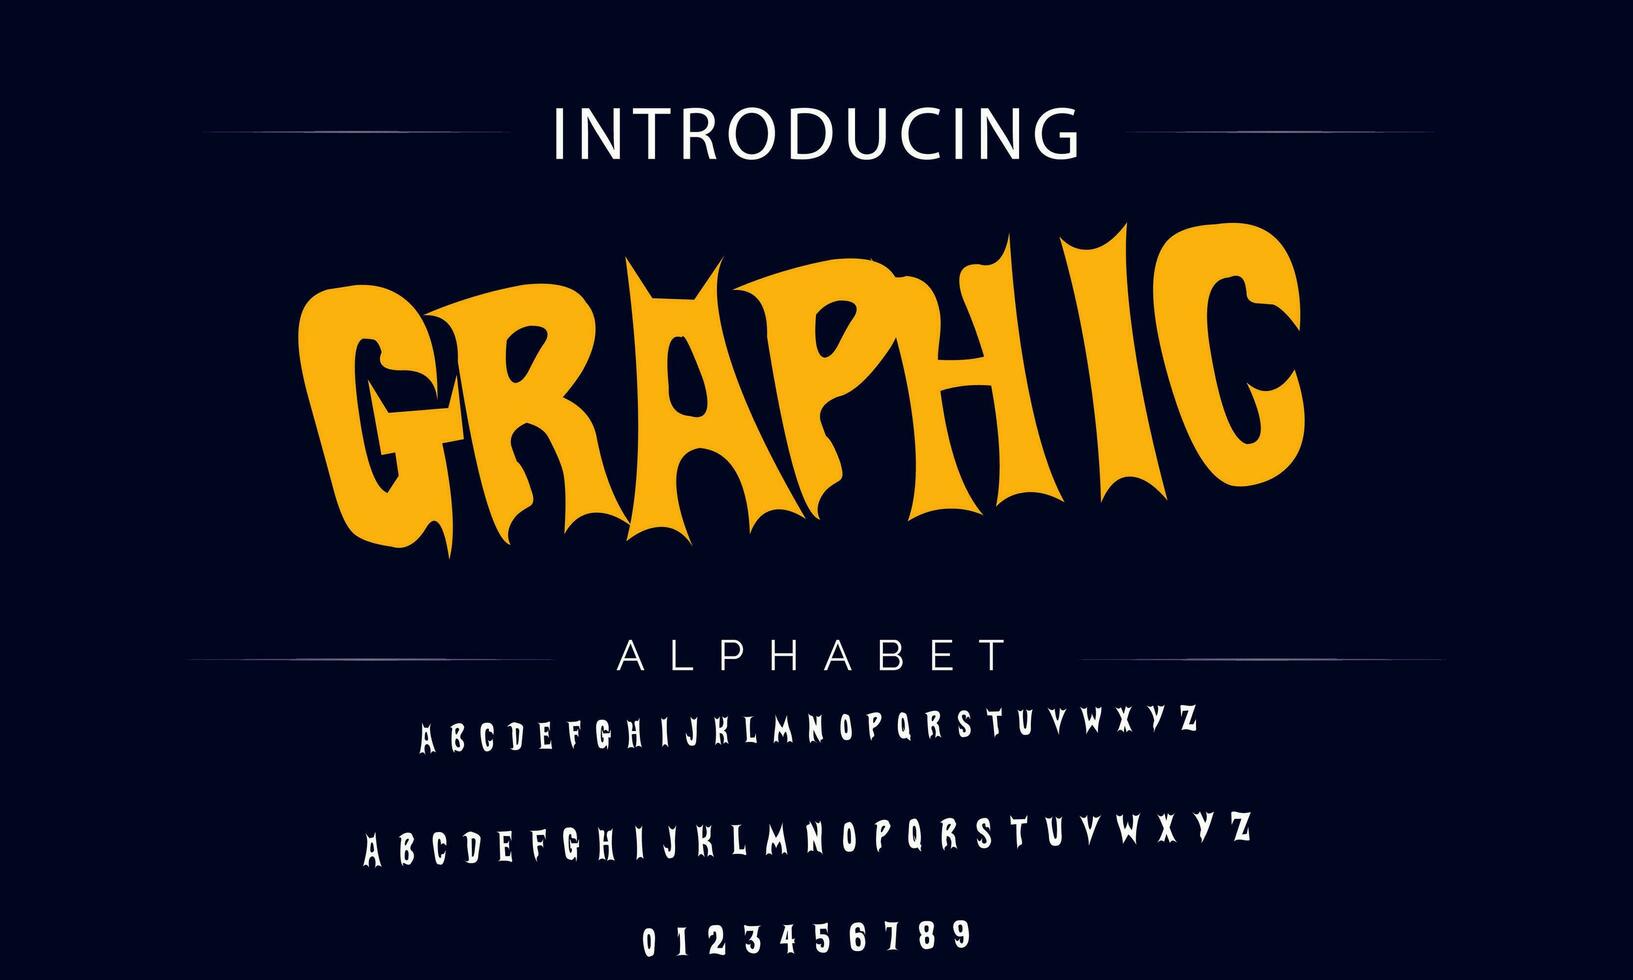 Colorful stylized font and alphabet vector